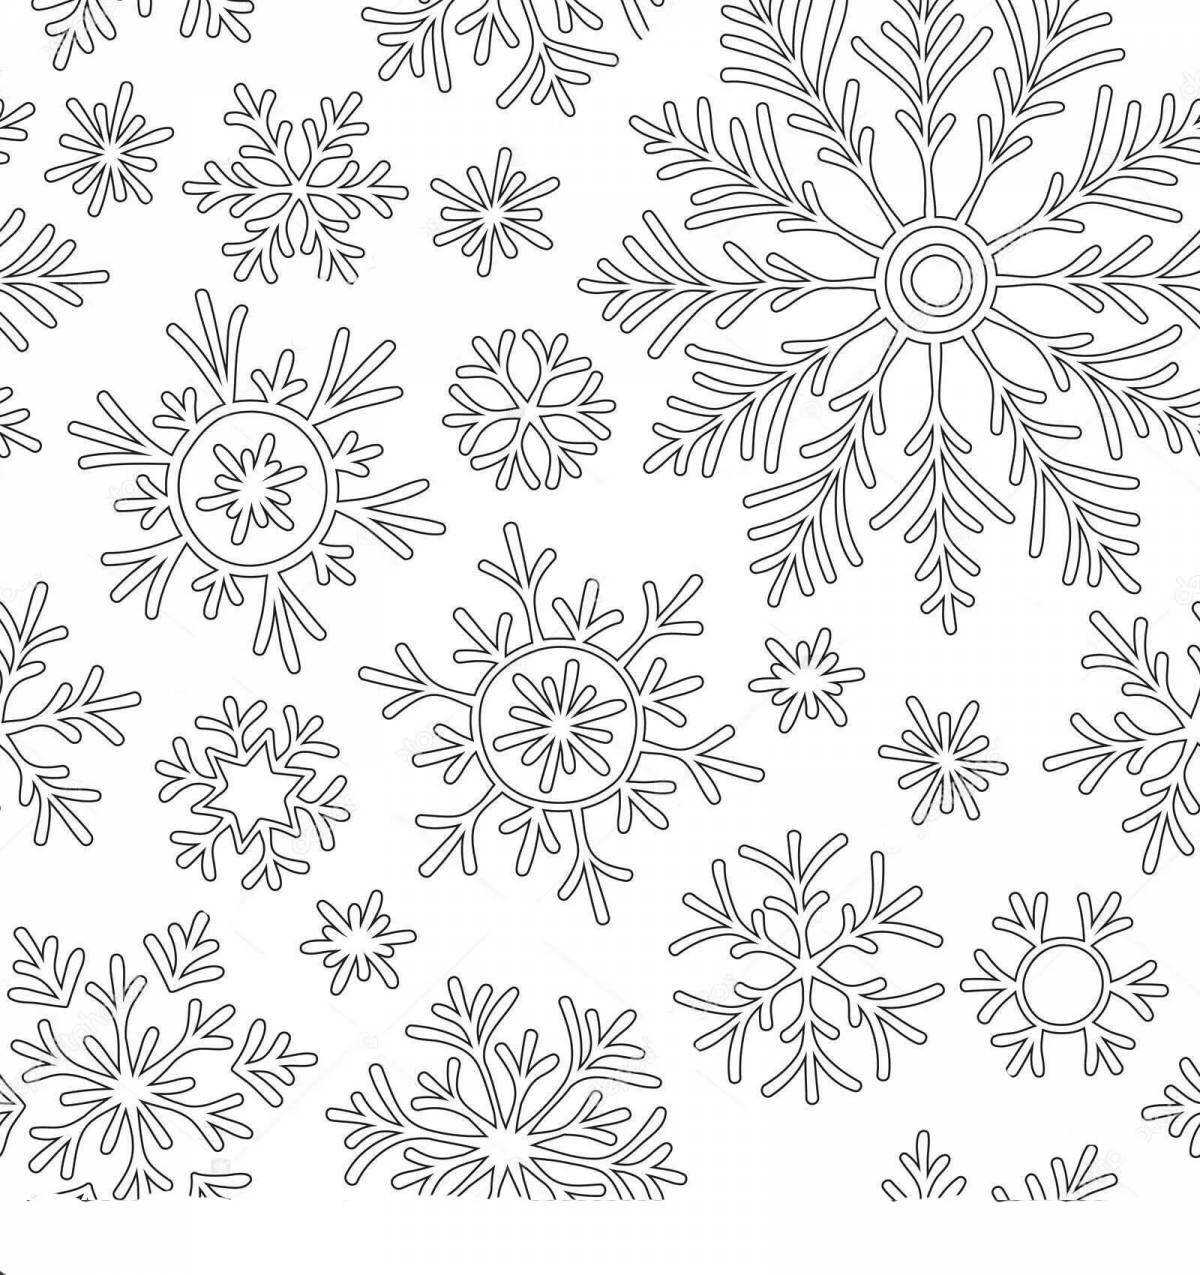 Artistic coloring frost patterns